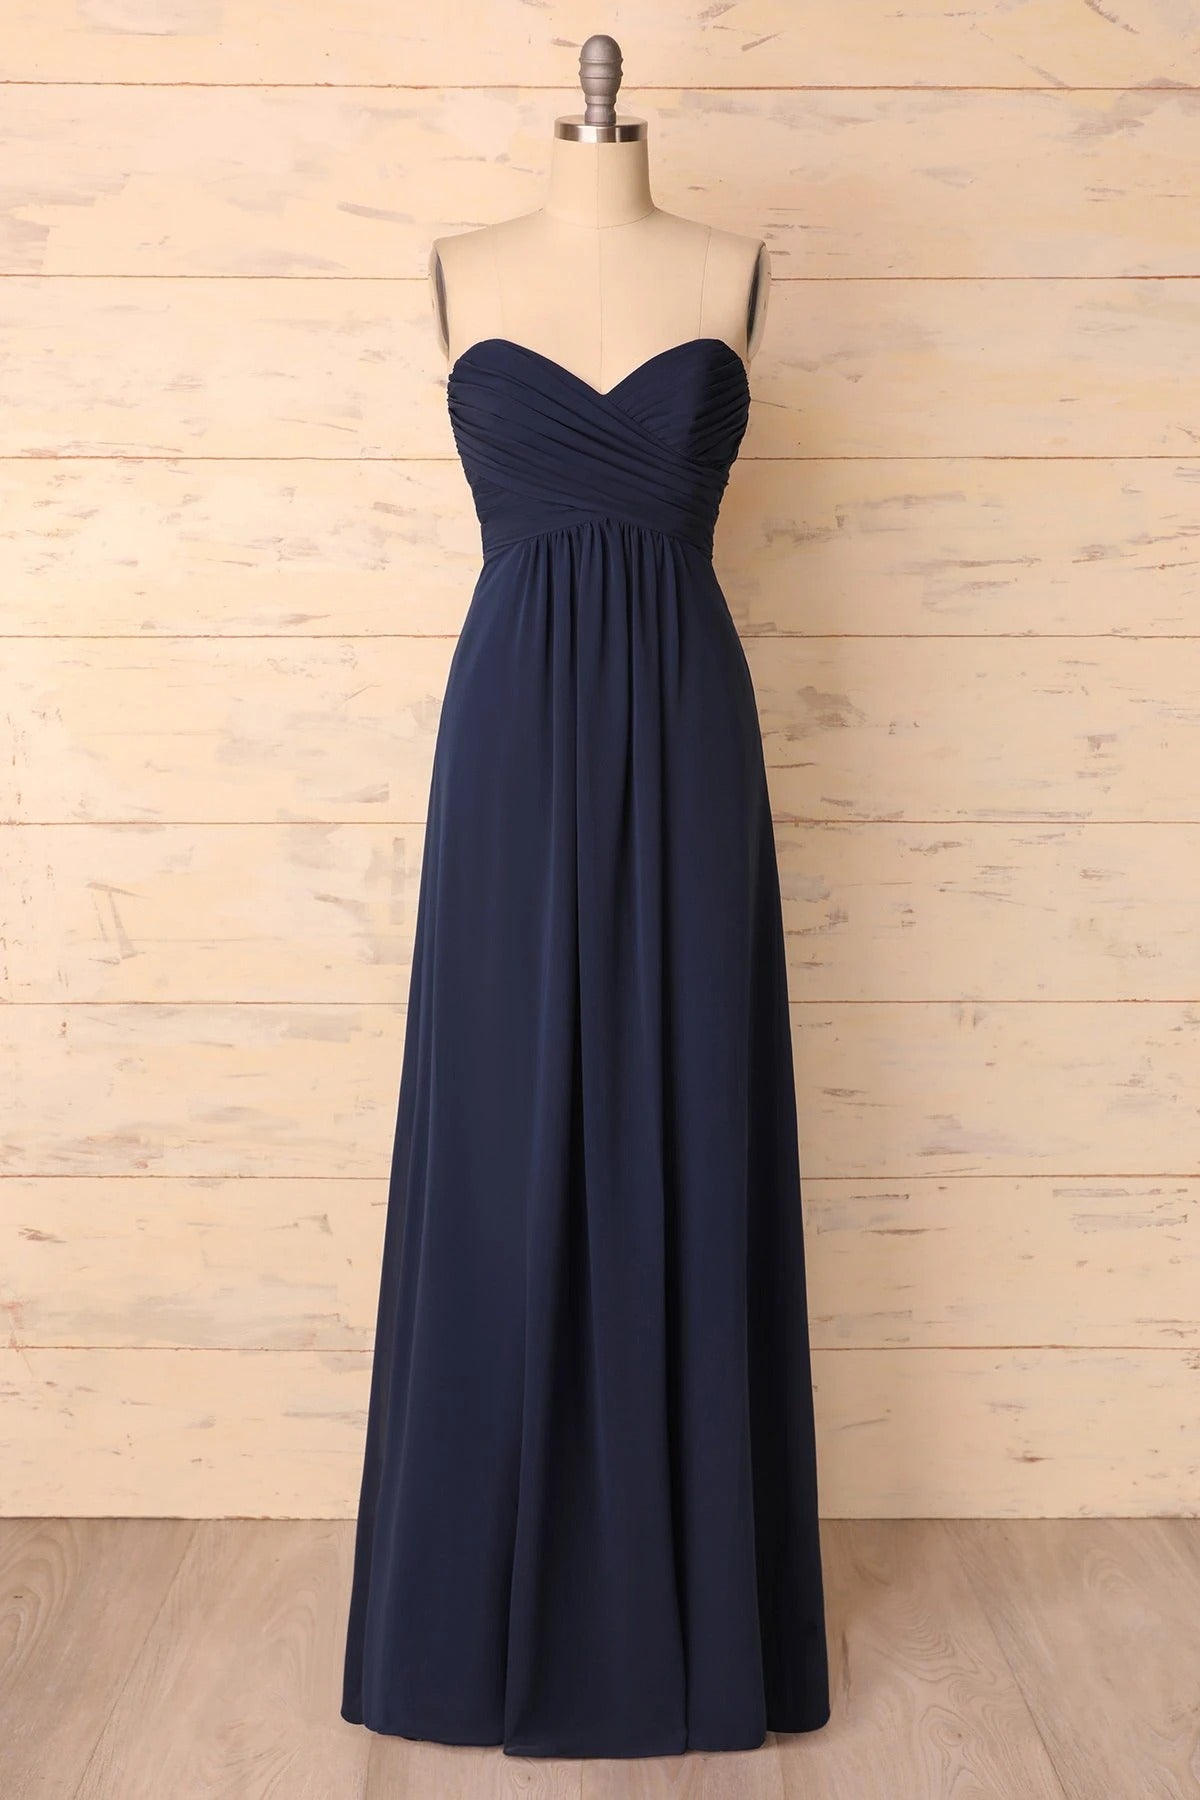 Elegant Sweetheart Pleated Navy Blue Corset Bridesmaid Dress outfit, Classy Dress Outfit